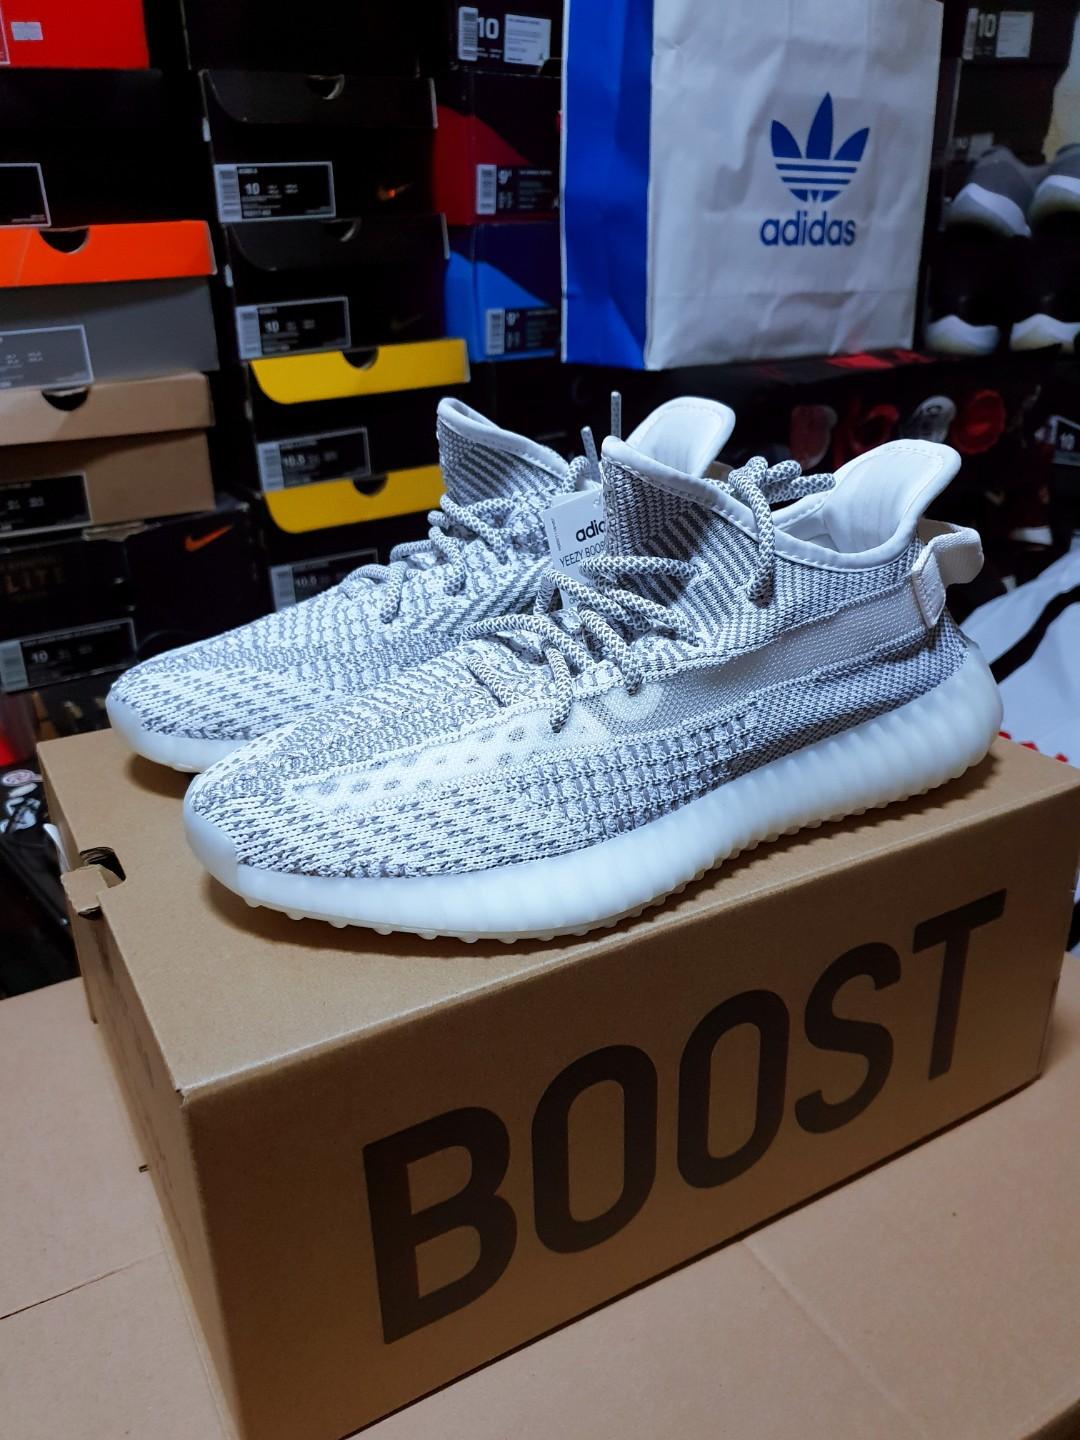 yeezy static non reflective for sale